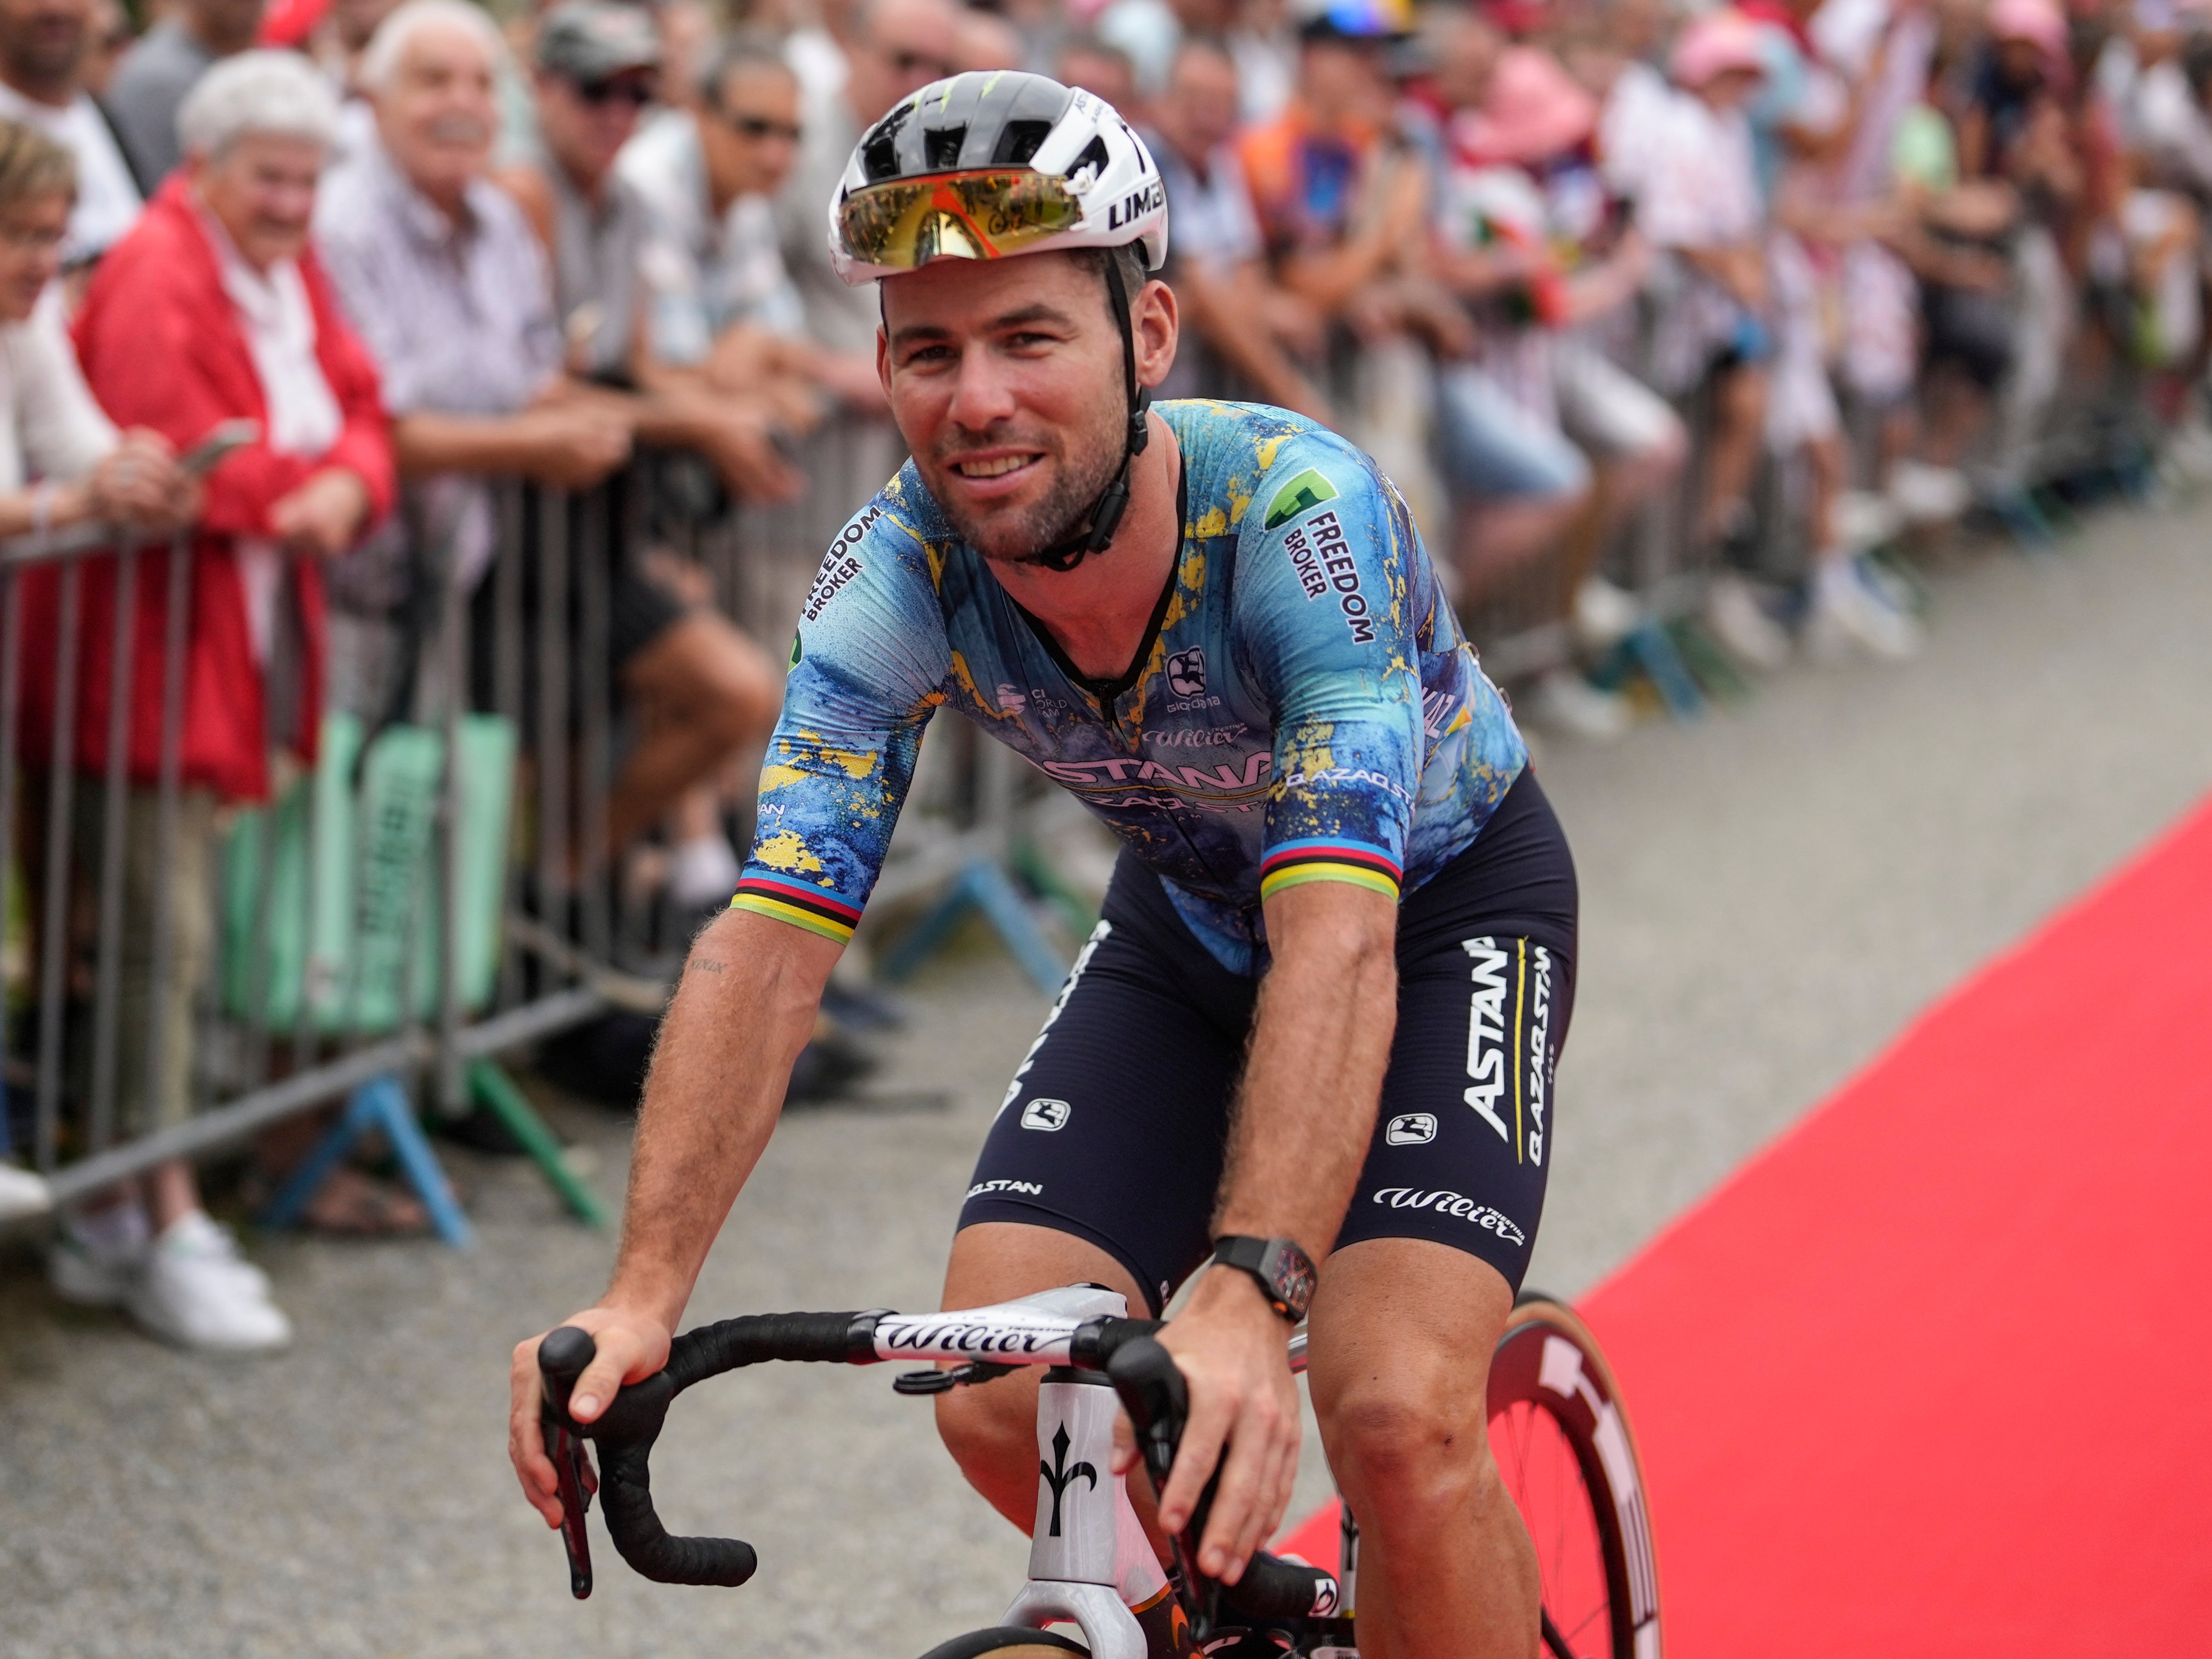 Mark Cavendish is one tantalising stage short of the holding the all-time Tour de France stage record on his own